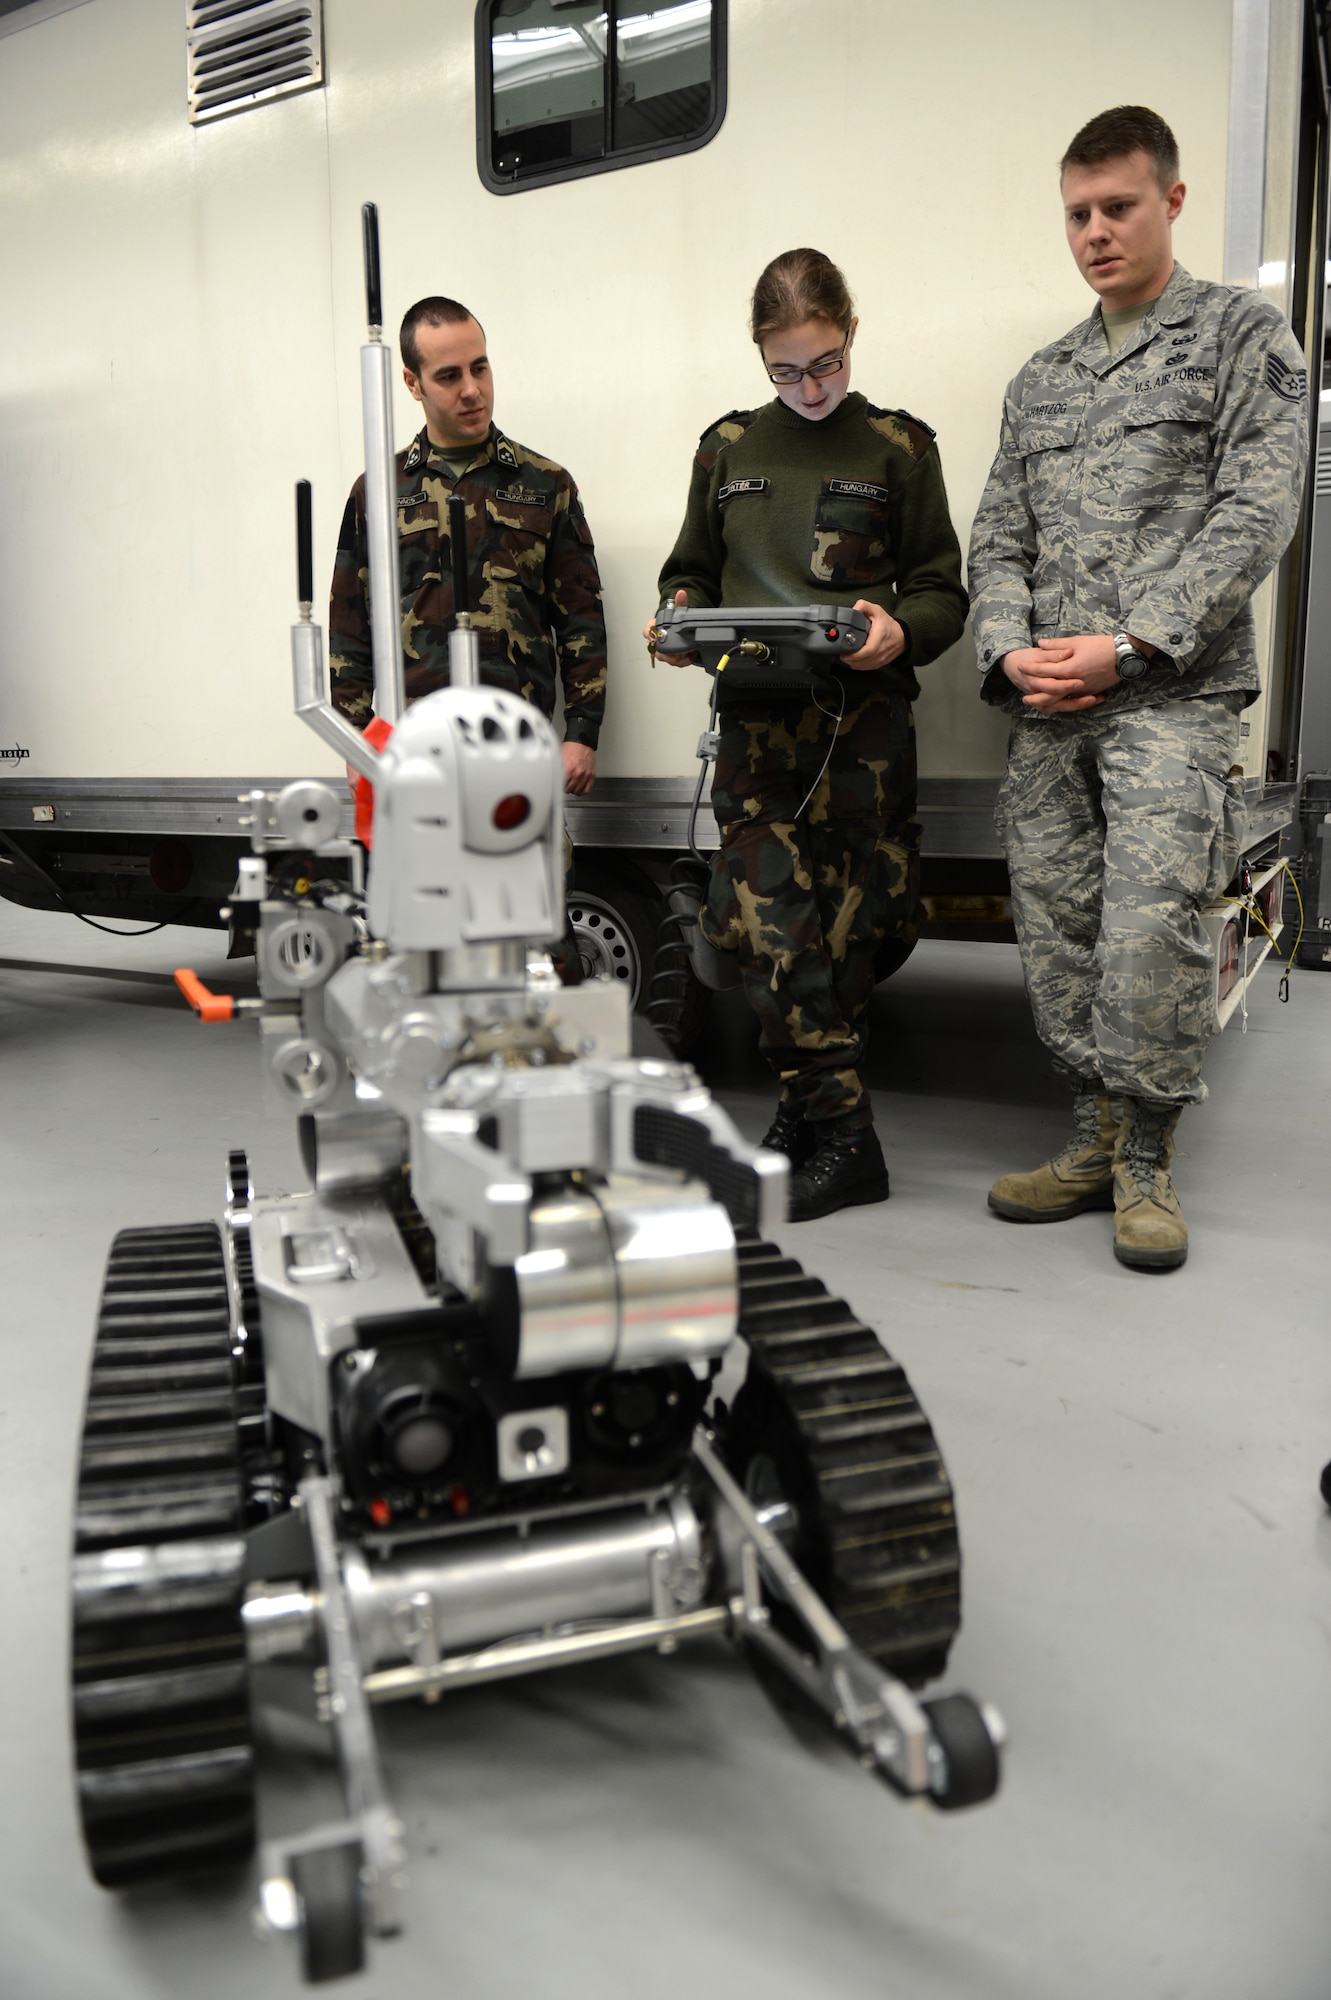 SPANGDAHLEM AIR BASE, Germany – Hungarian army Sgt. Agnes Pinter, Hungarian Defense Force NCO Academy counter IED instructor, controls a Remotec HD-2 remote control military robot at the 52nd Civil Engineer Squadron Explosive Ordnance Disposal shop Dec. 4, 2012. Hungarian army members visited Spangdahlem Air Base to join forces in teaching information on the most current threats in contingency operations across the globe. EOD Airmen try to host multinational training as much as possible, but this is their first time working with the Hungarian Army. (U.S. Air Force photo by Airman 1st Class Gustavo Castillo/Released)